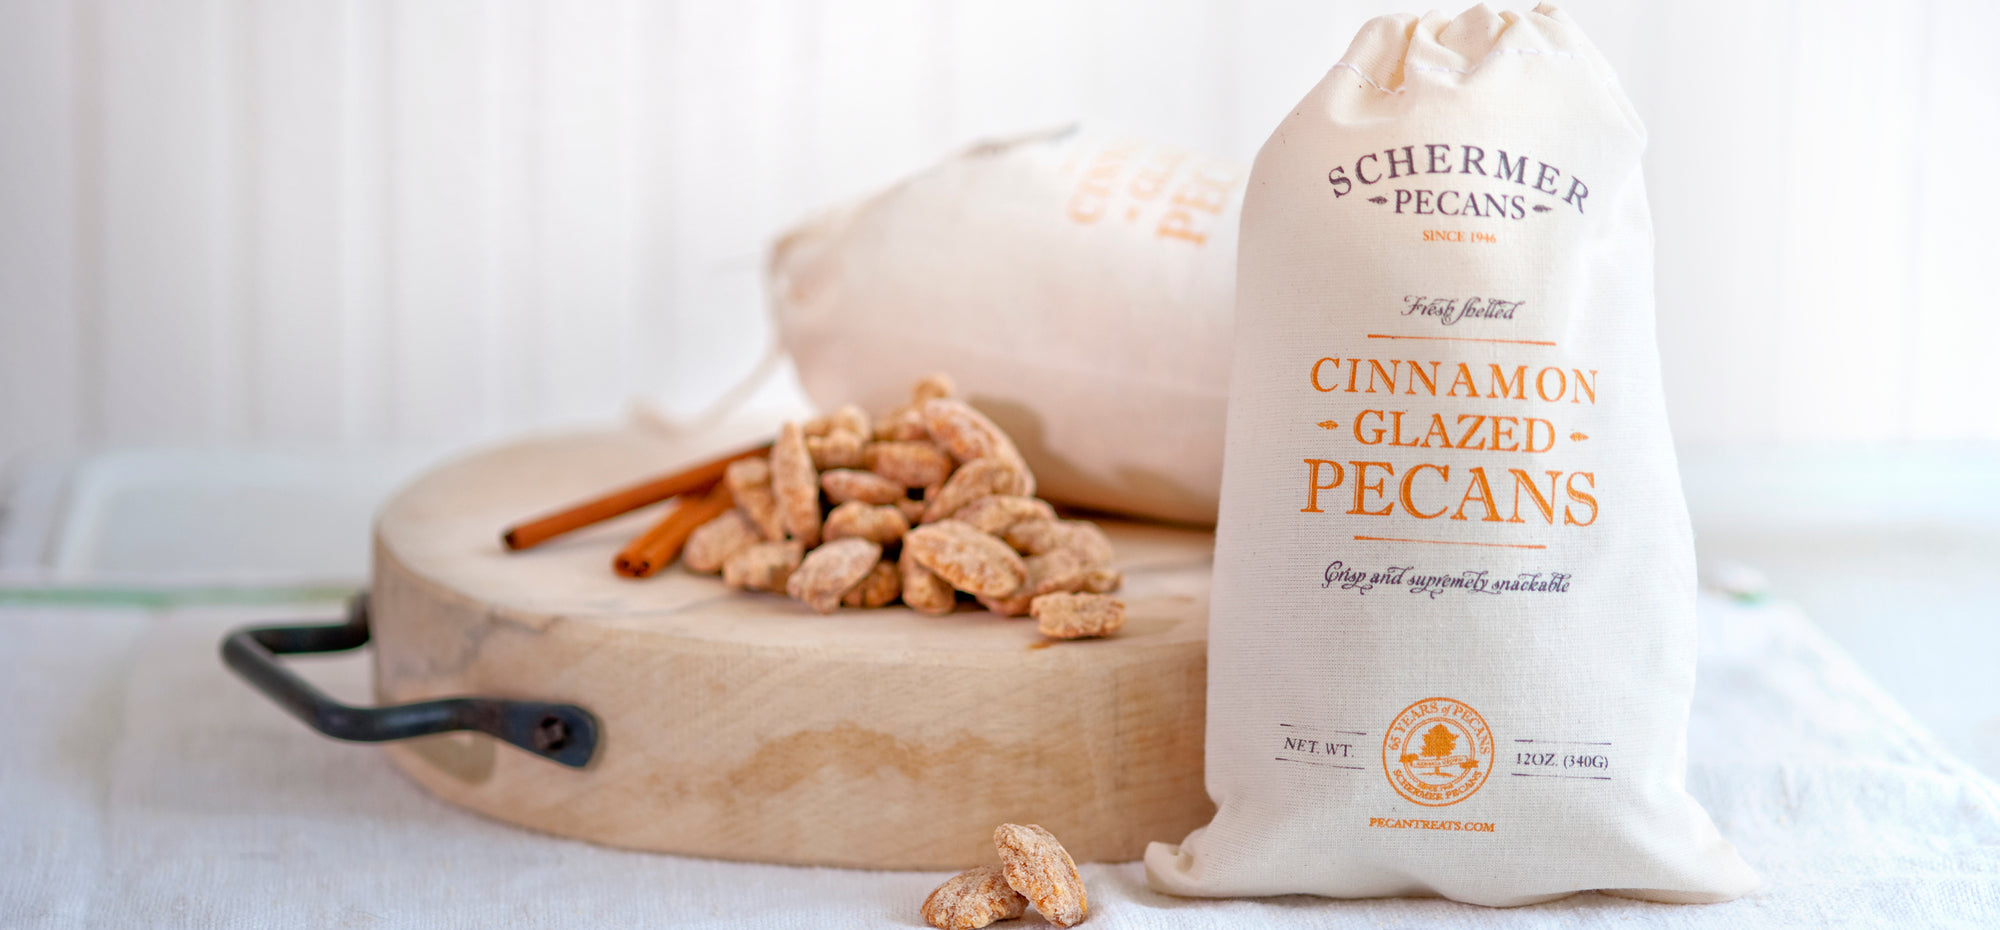 Image of Schermer Cinnamon Glazed Pecans in a cloth gift bag next to a cutting board with cinnamon glazed pecans and cinnamon sticks.